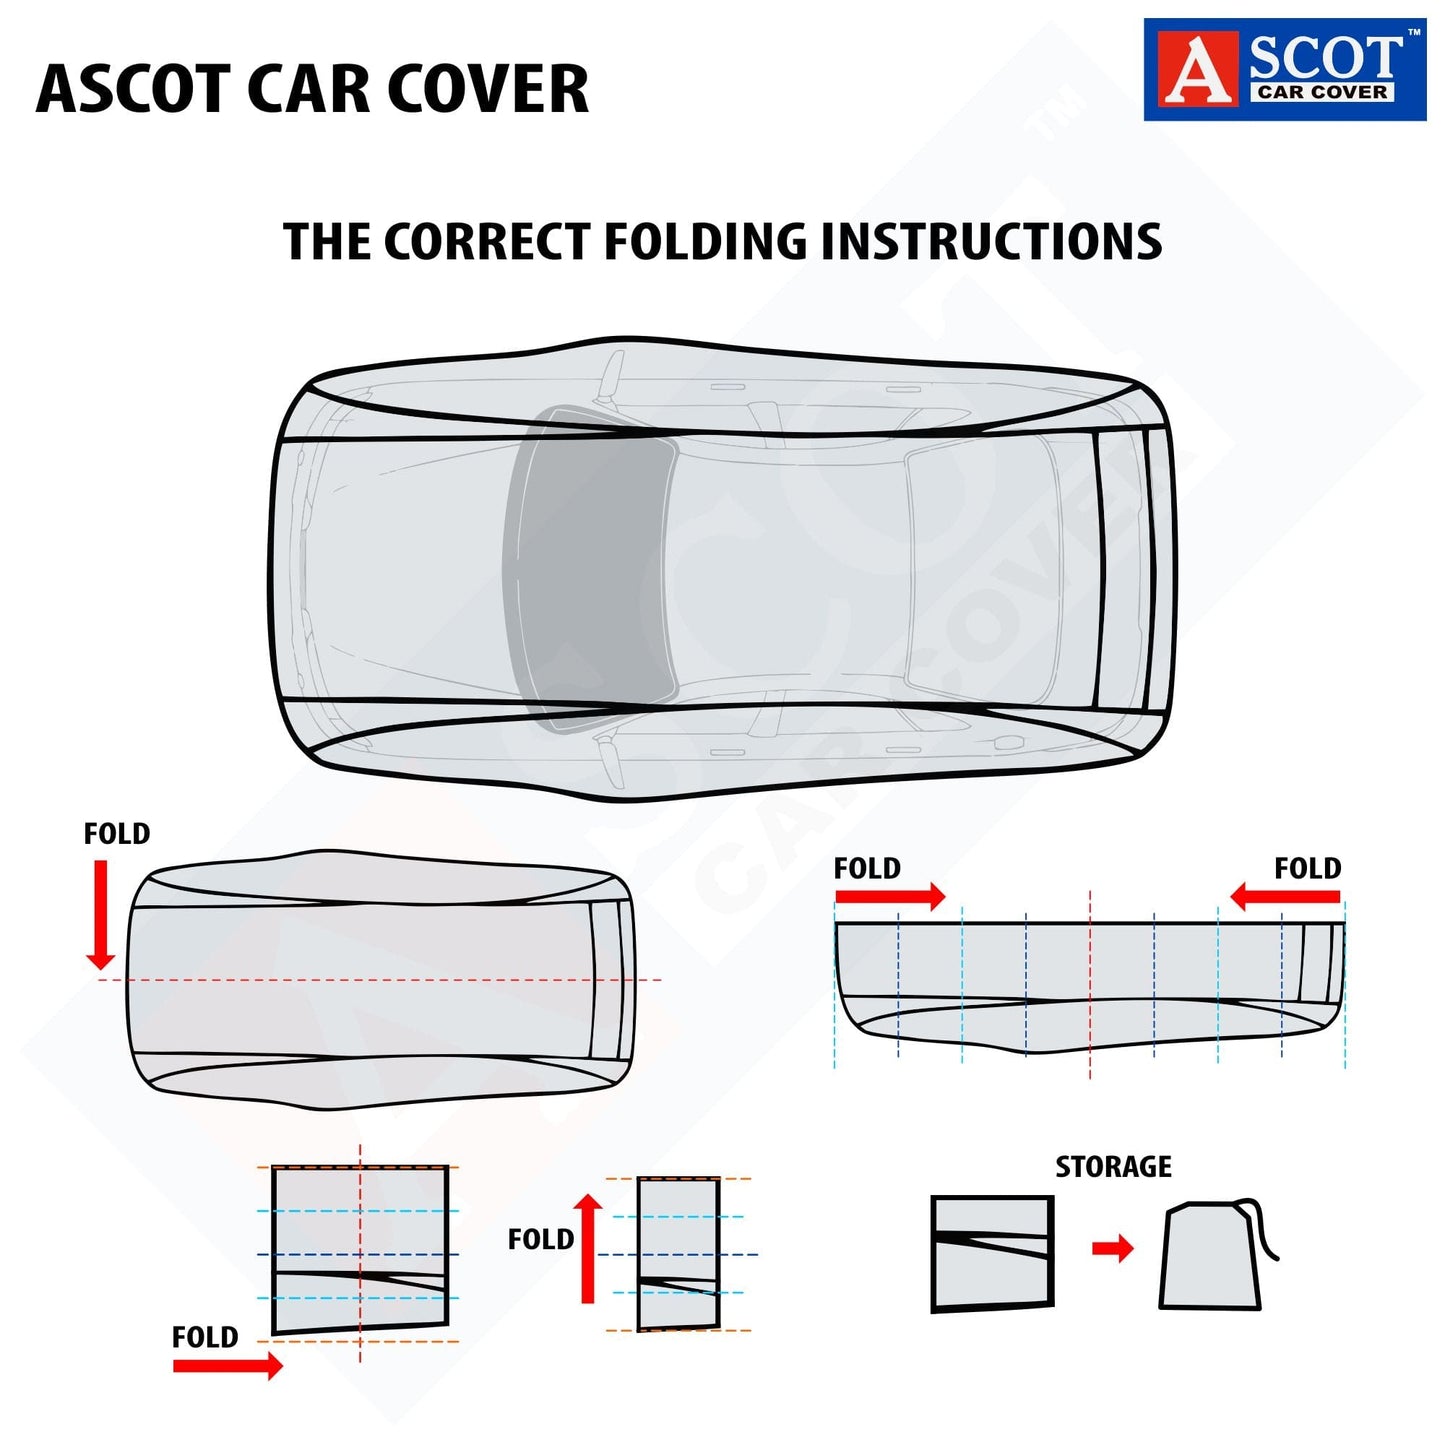 Easily Folding Instructions of Car Cover from right to middle & fold from front and back to middle and store in a bag